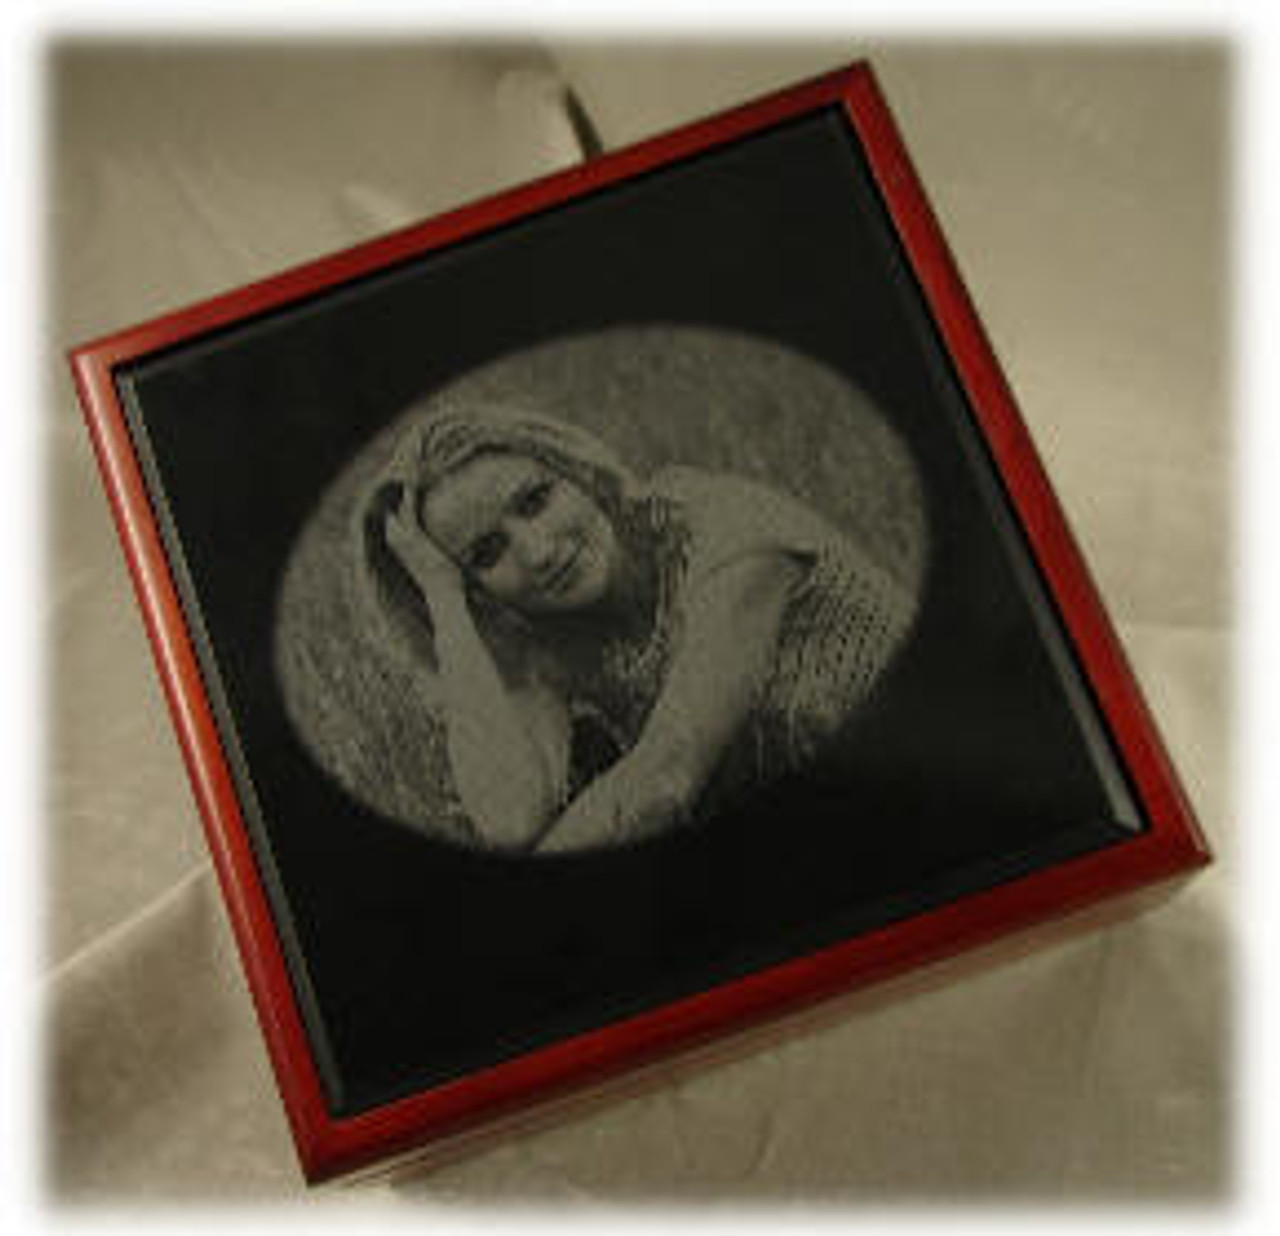 M-AB-6x6x3/8EP, Absolute Black Marble, Engraved and Mounted in a Wood Urn as Illustration